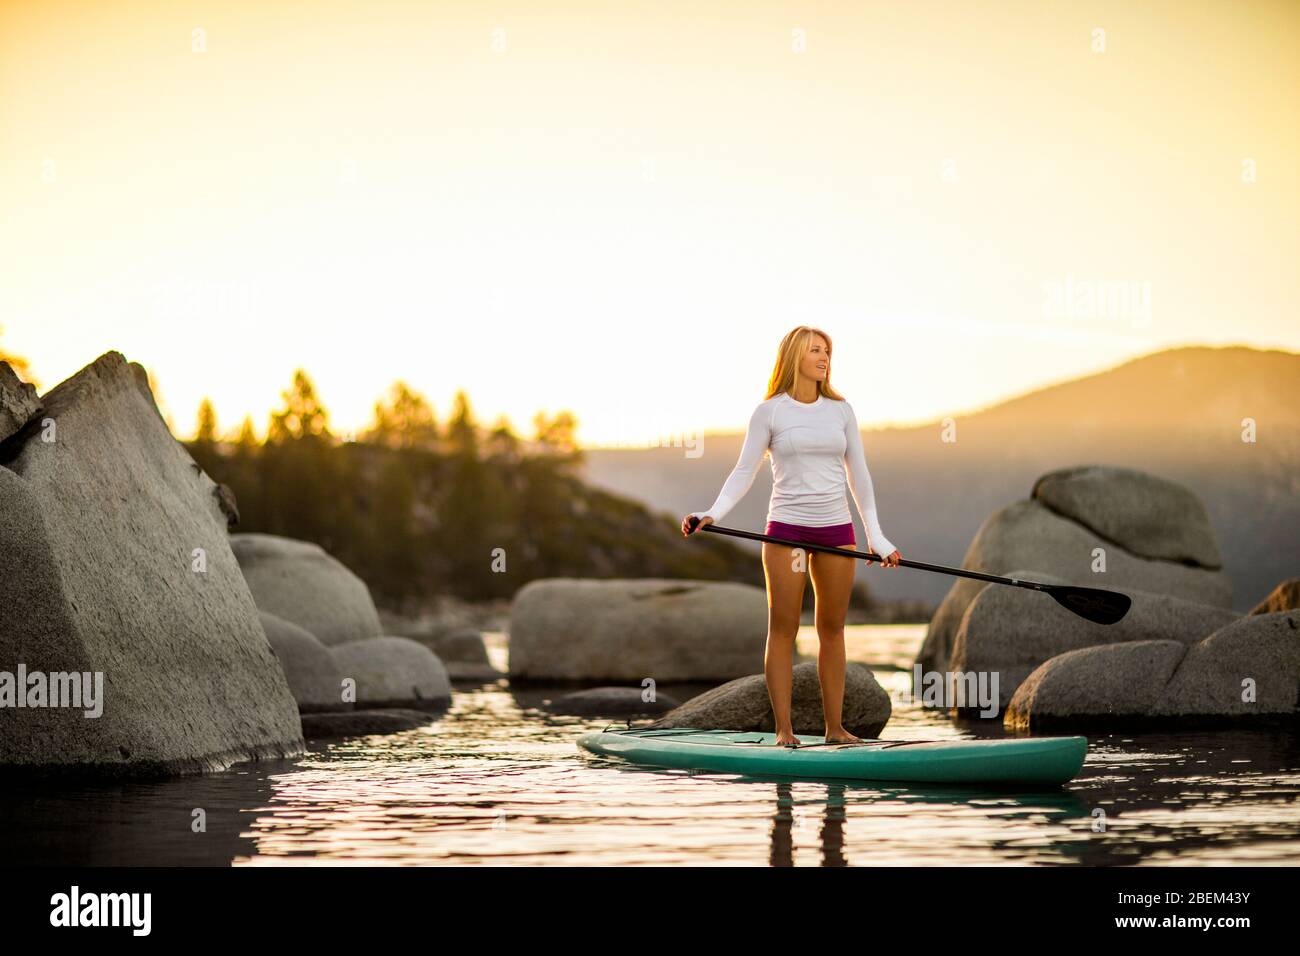 Young woman paddle boarding on a lake Stock Photo